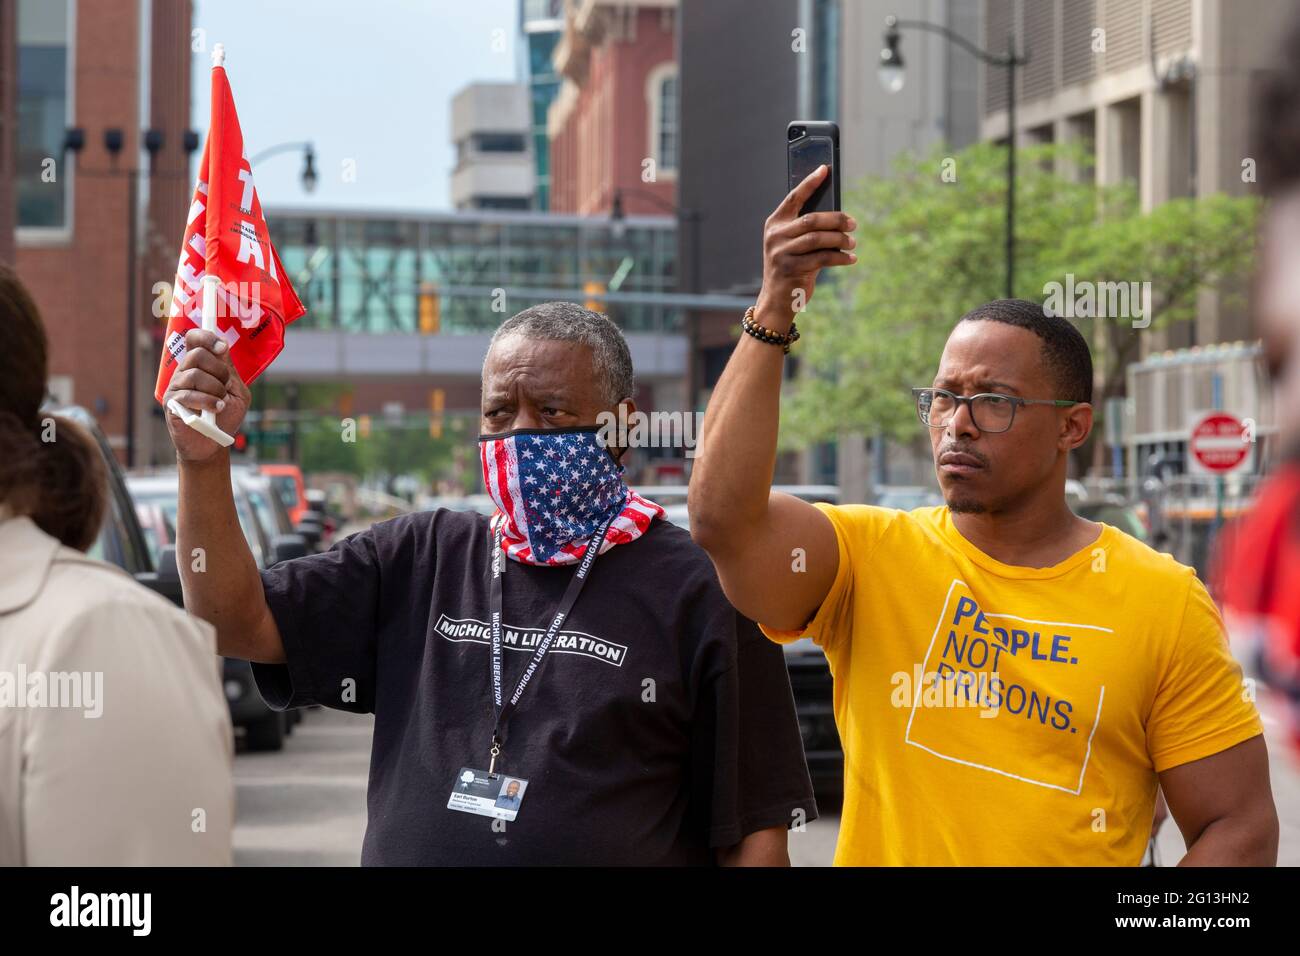 Detroit, Michigan, USA. 4th June, 2021. Family and friends of prisoners they say were wrongfully convicted rally outside the criminal courts building, the Frank Murphy Hall of Justice. Credit: Jim West/Alamy Live News Stock Photo